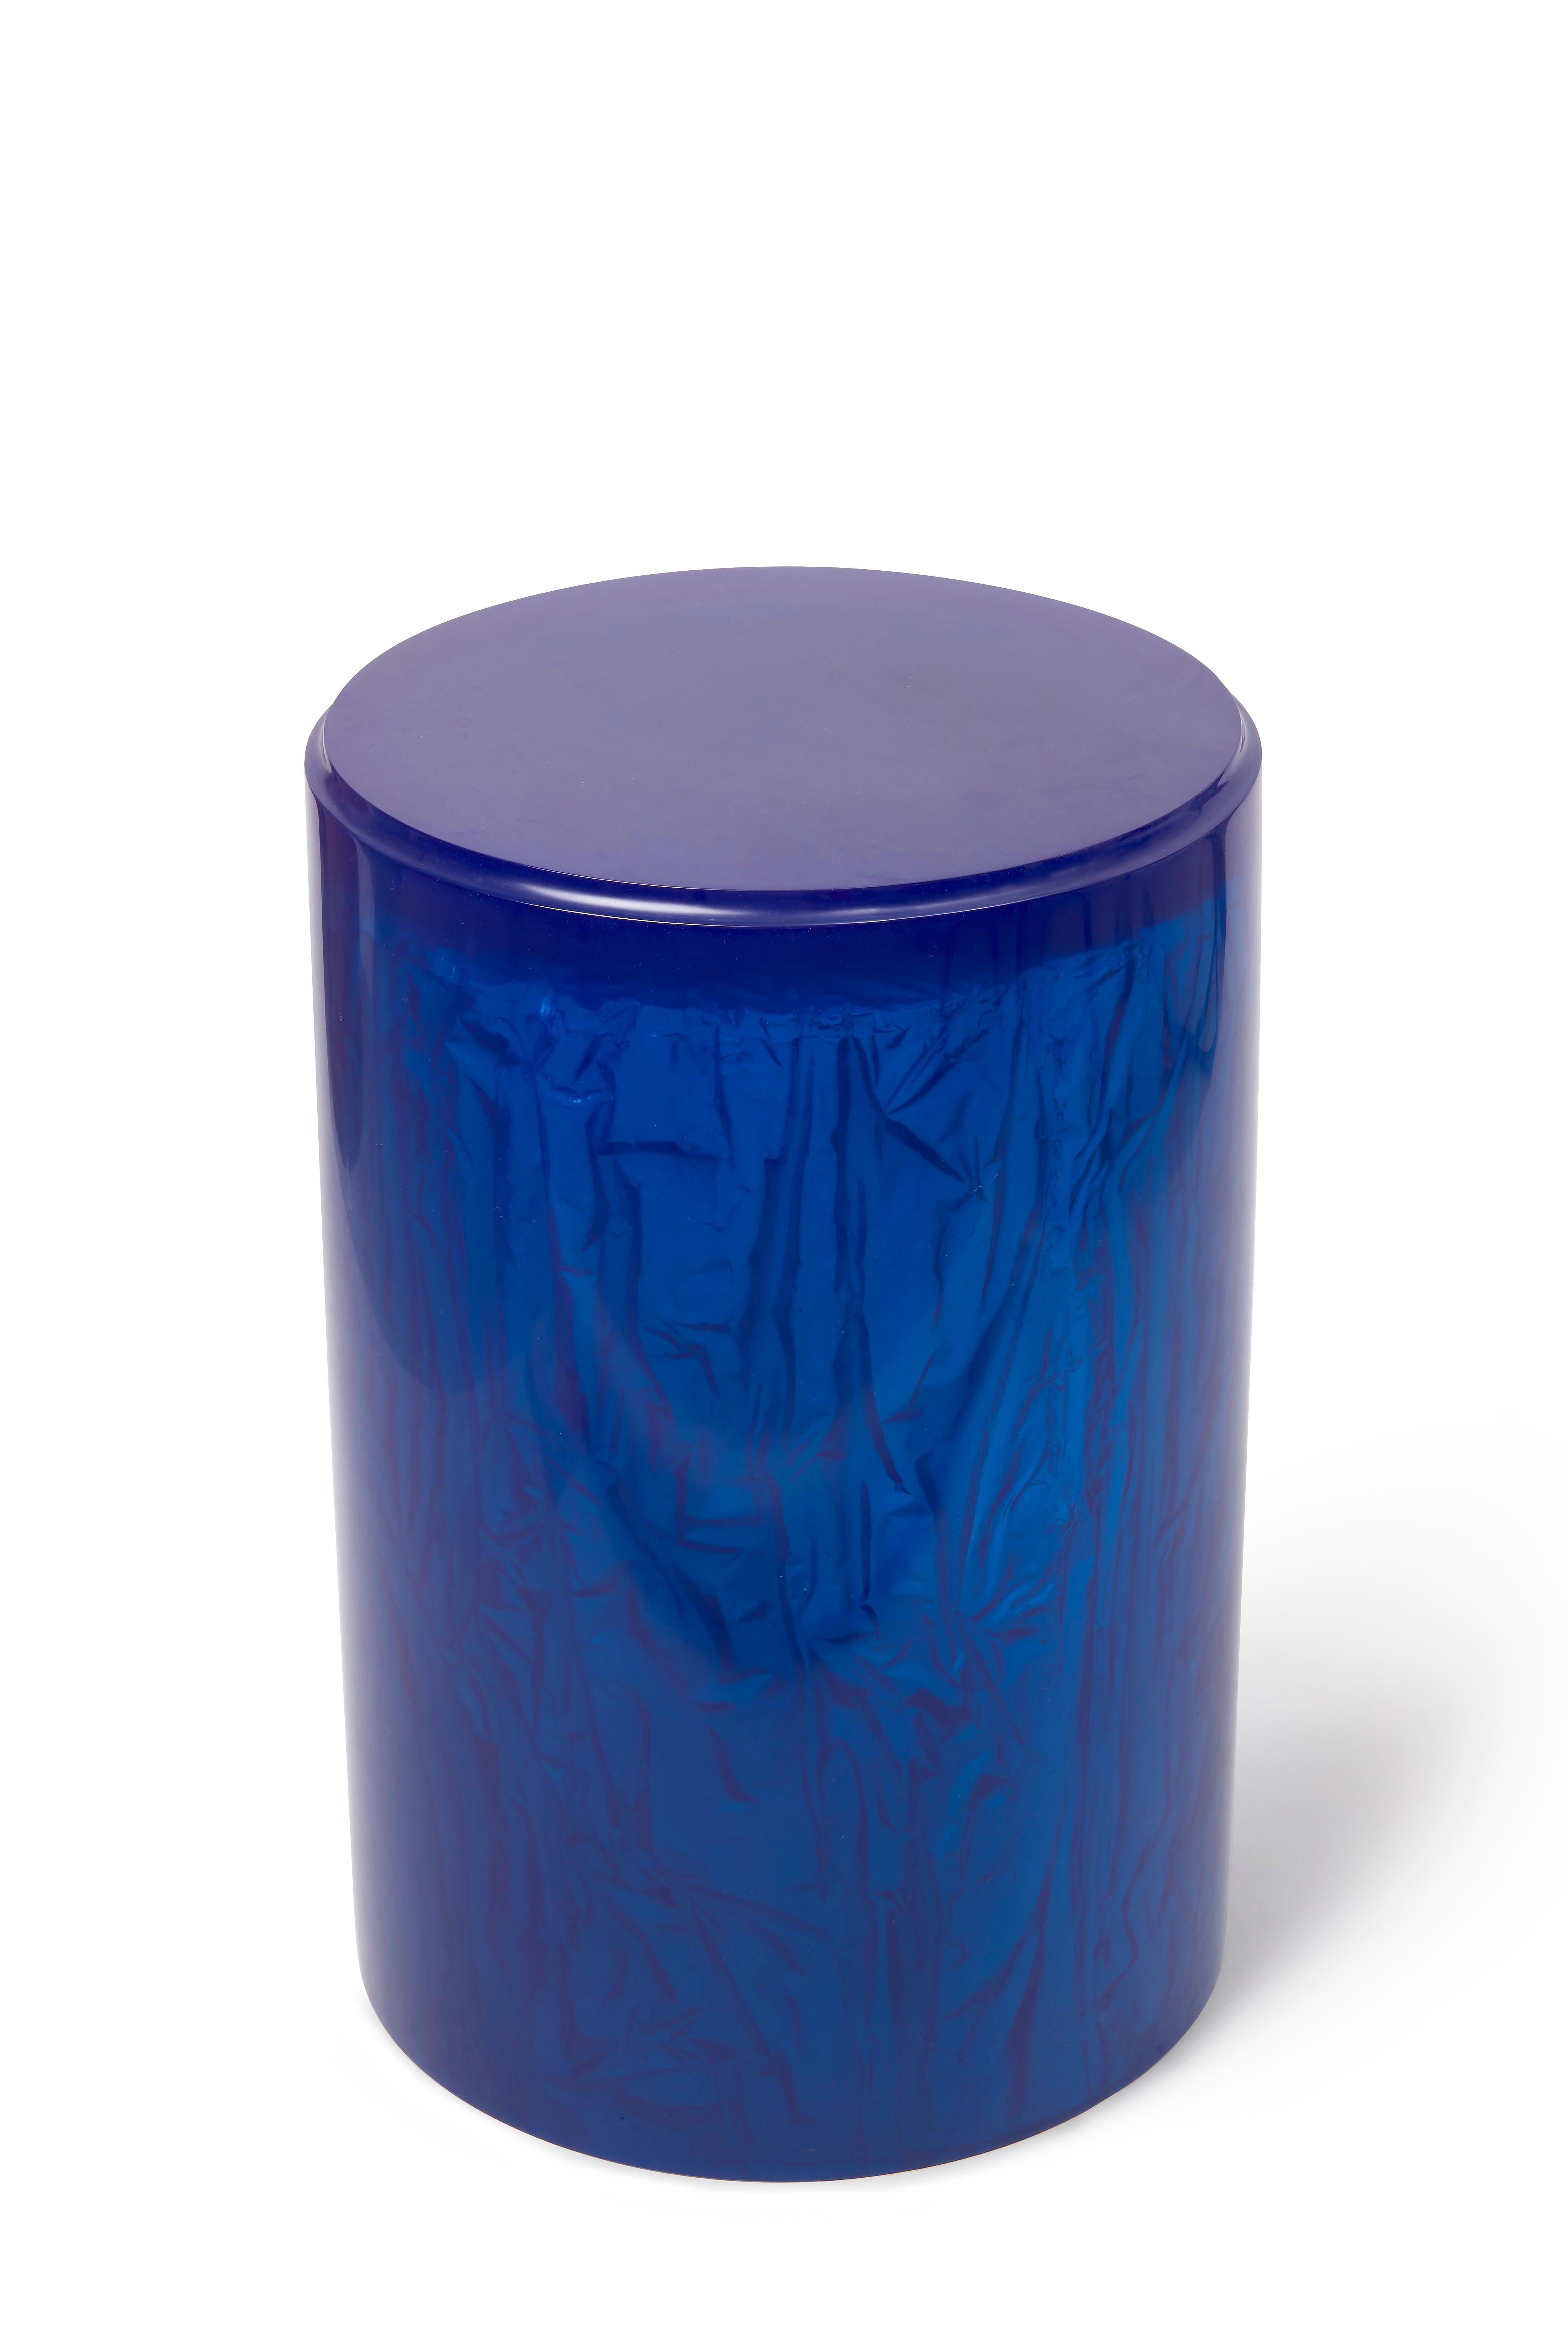 Cast Contemporary Resin Acrylic Side Table or Stool by Natalie Tredgett, Cobalt Blue For Sale